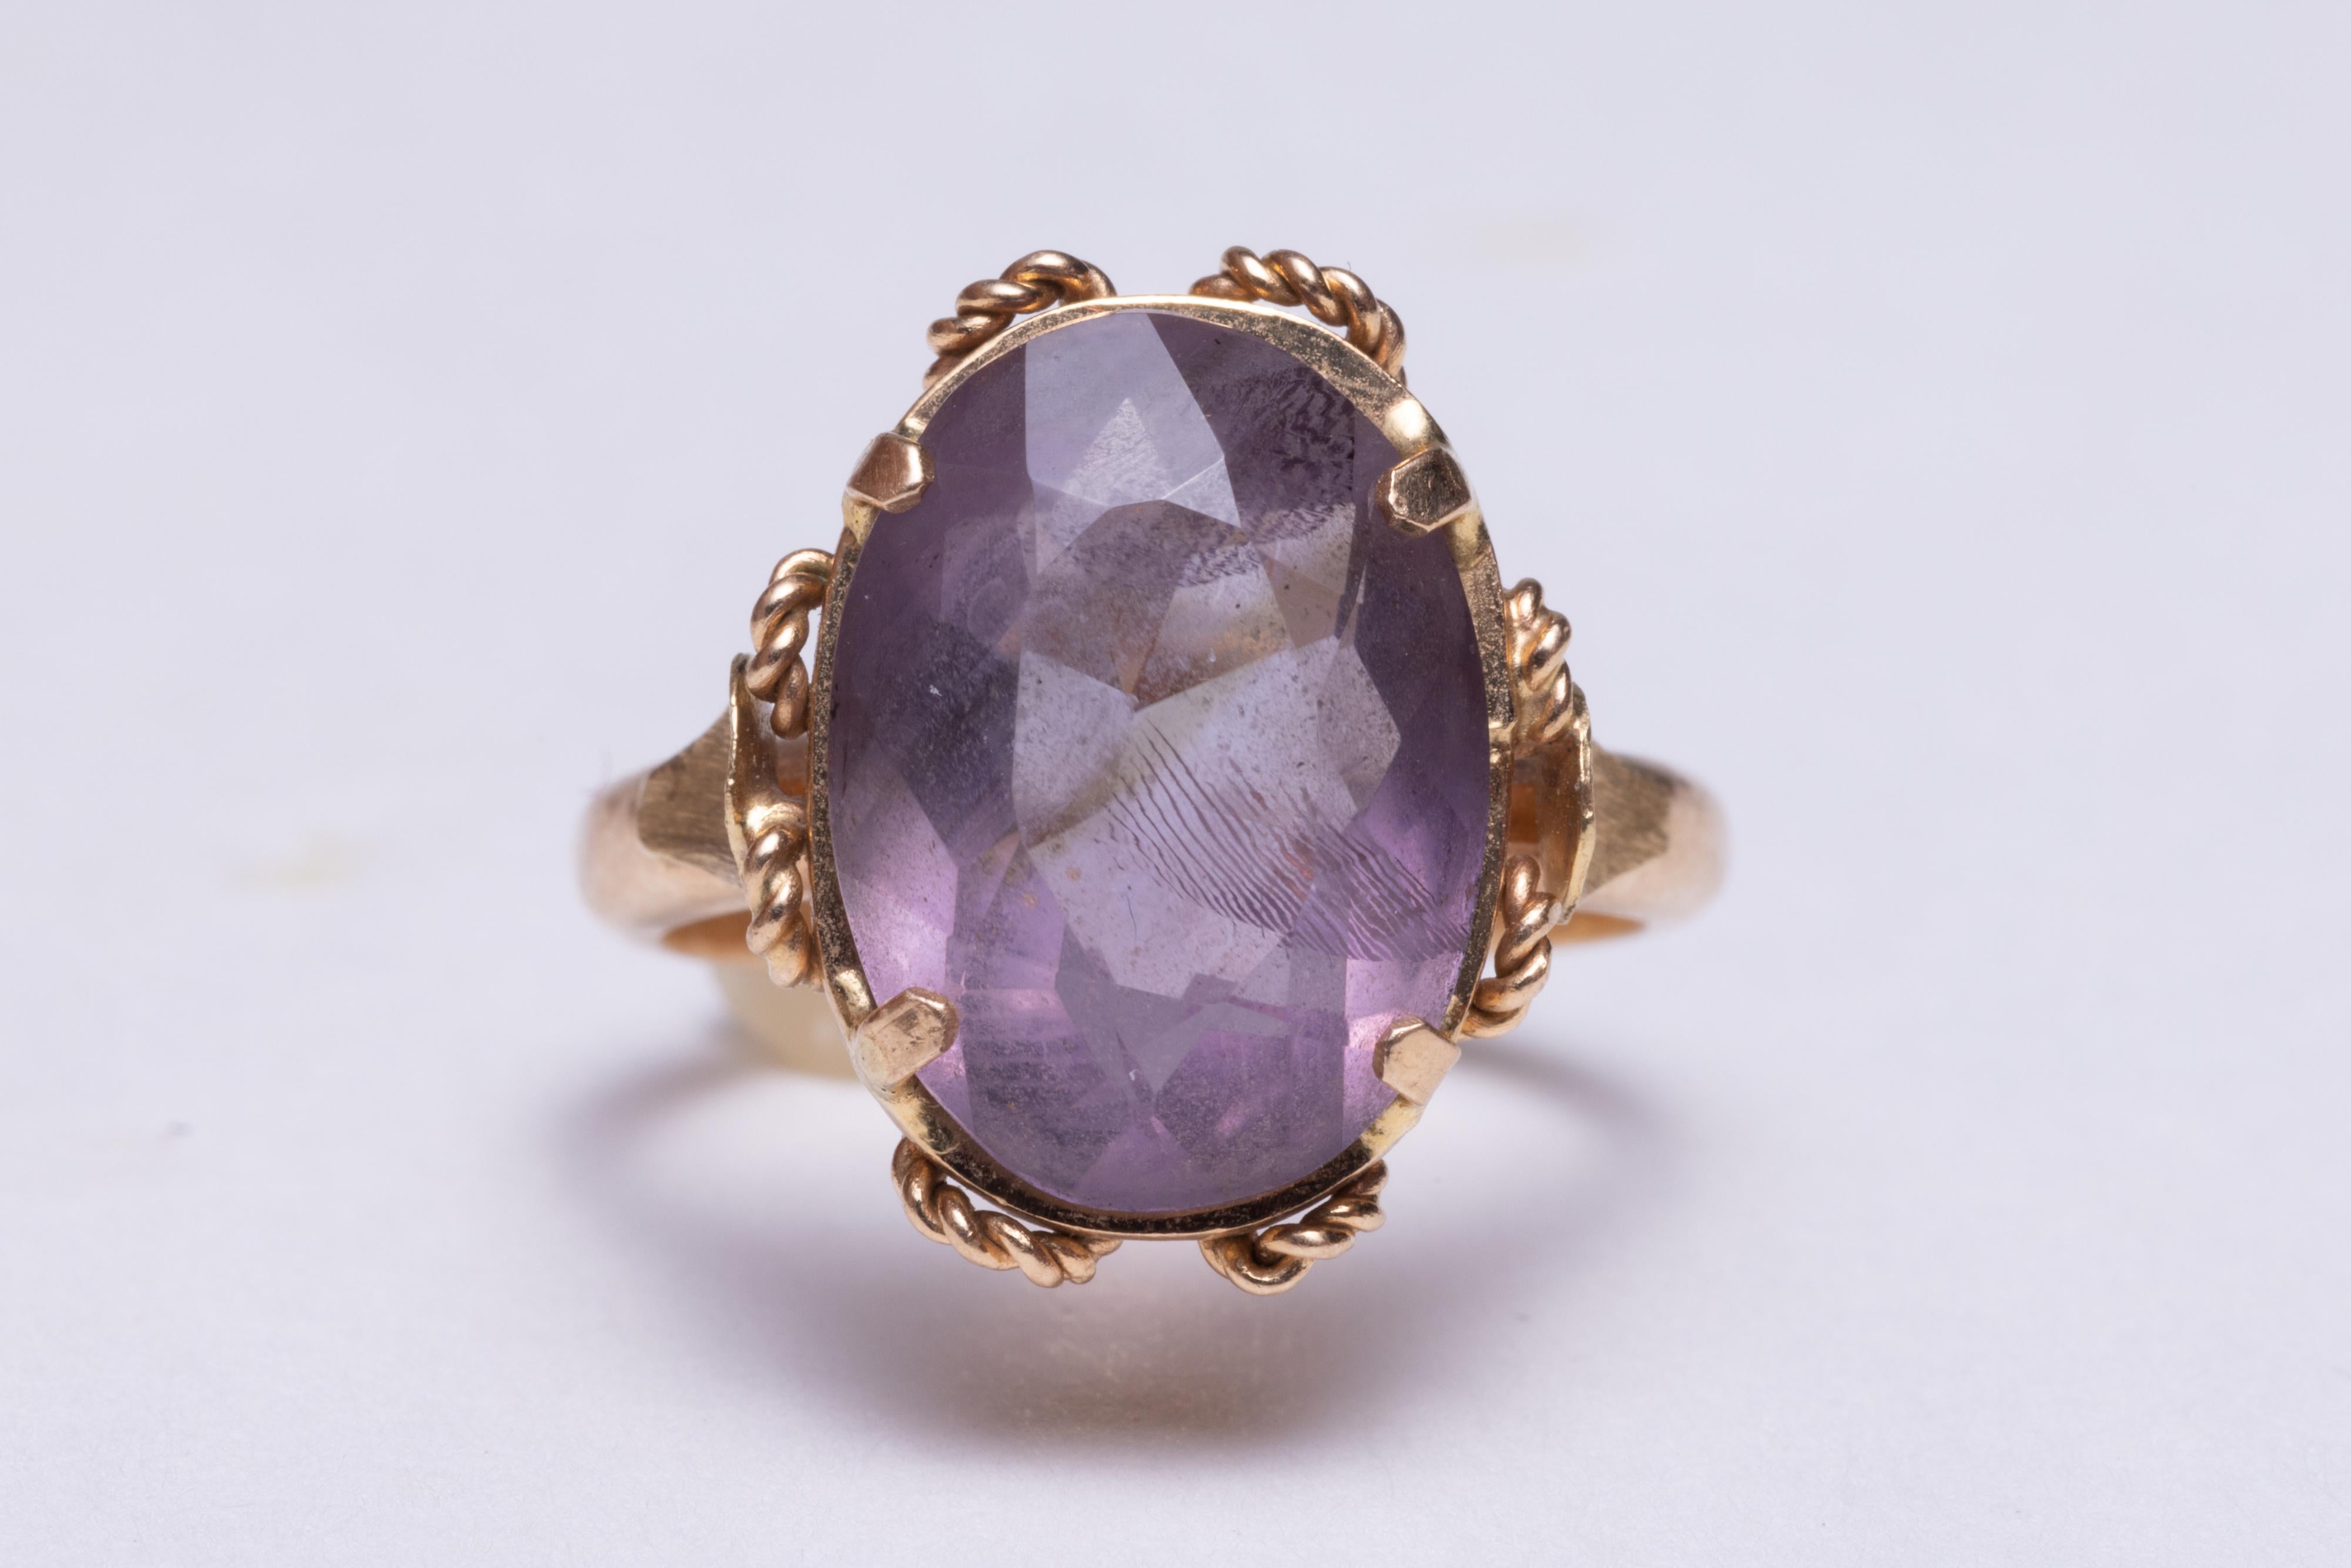 An elegant 18K gold ring with textured wire work as the basket of the stone.  It features a 7 carat, faceted oval amethyst stone.    Ring size is 6.25